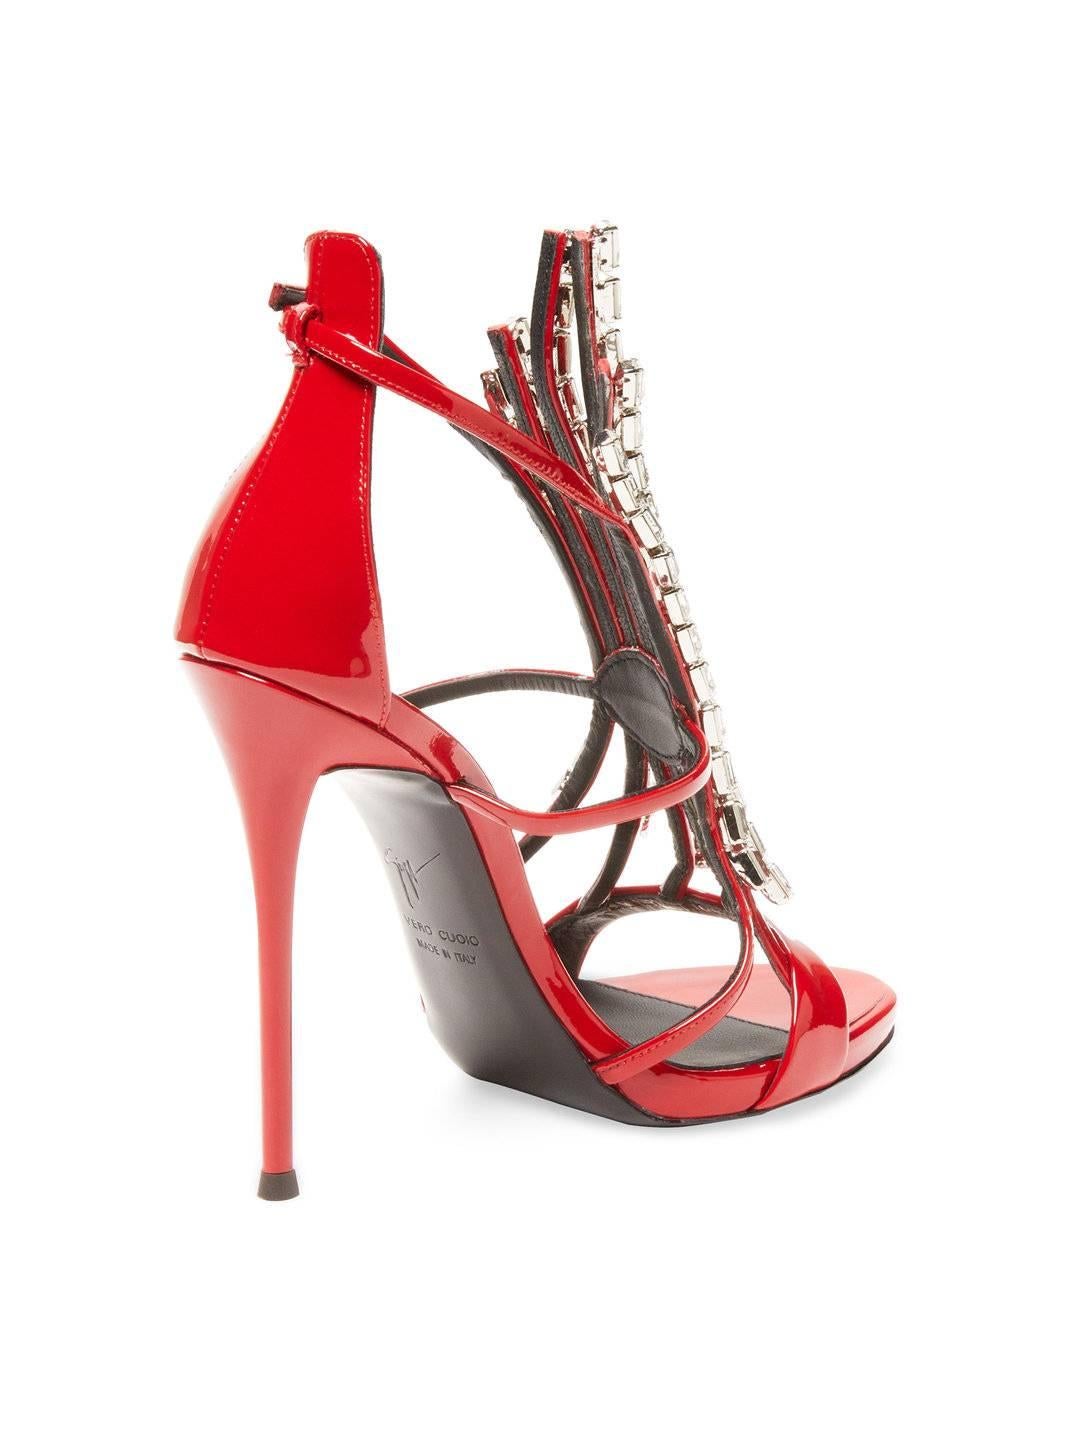 Giuseppe Zanotti NEW & SOLD OUT Red Patent Jewel Evening Sandals Heels in Box 1